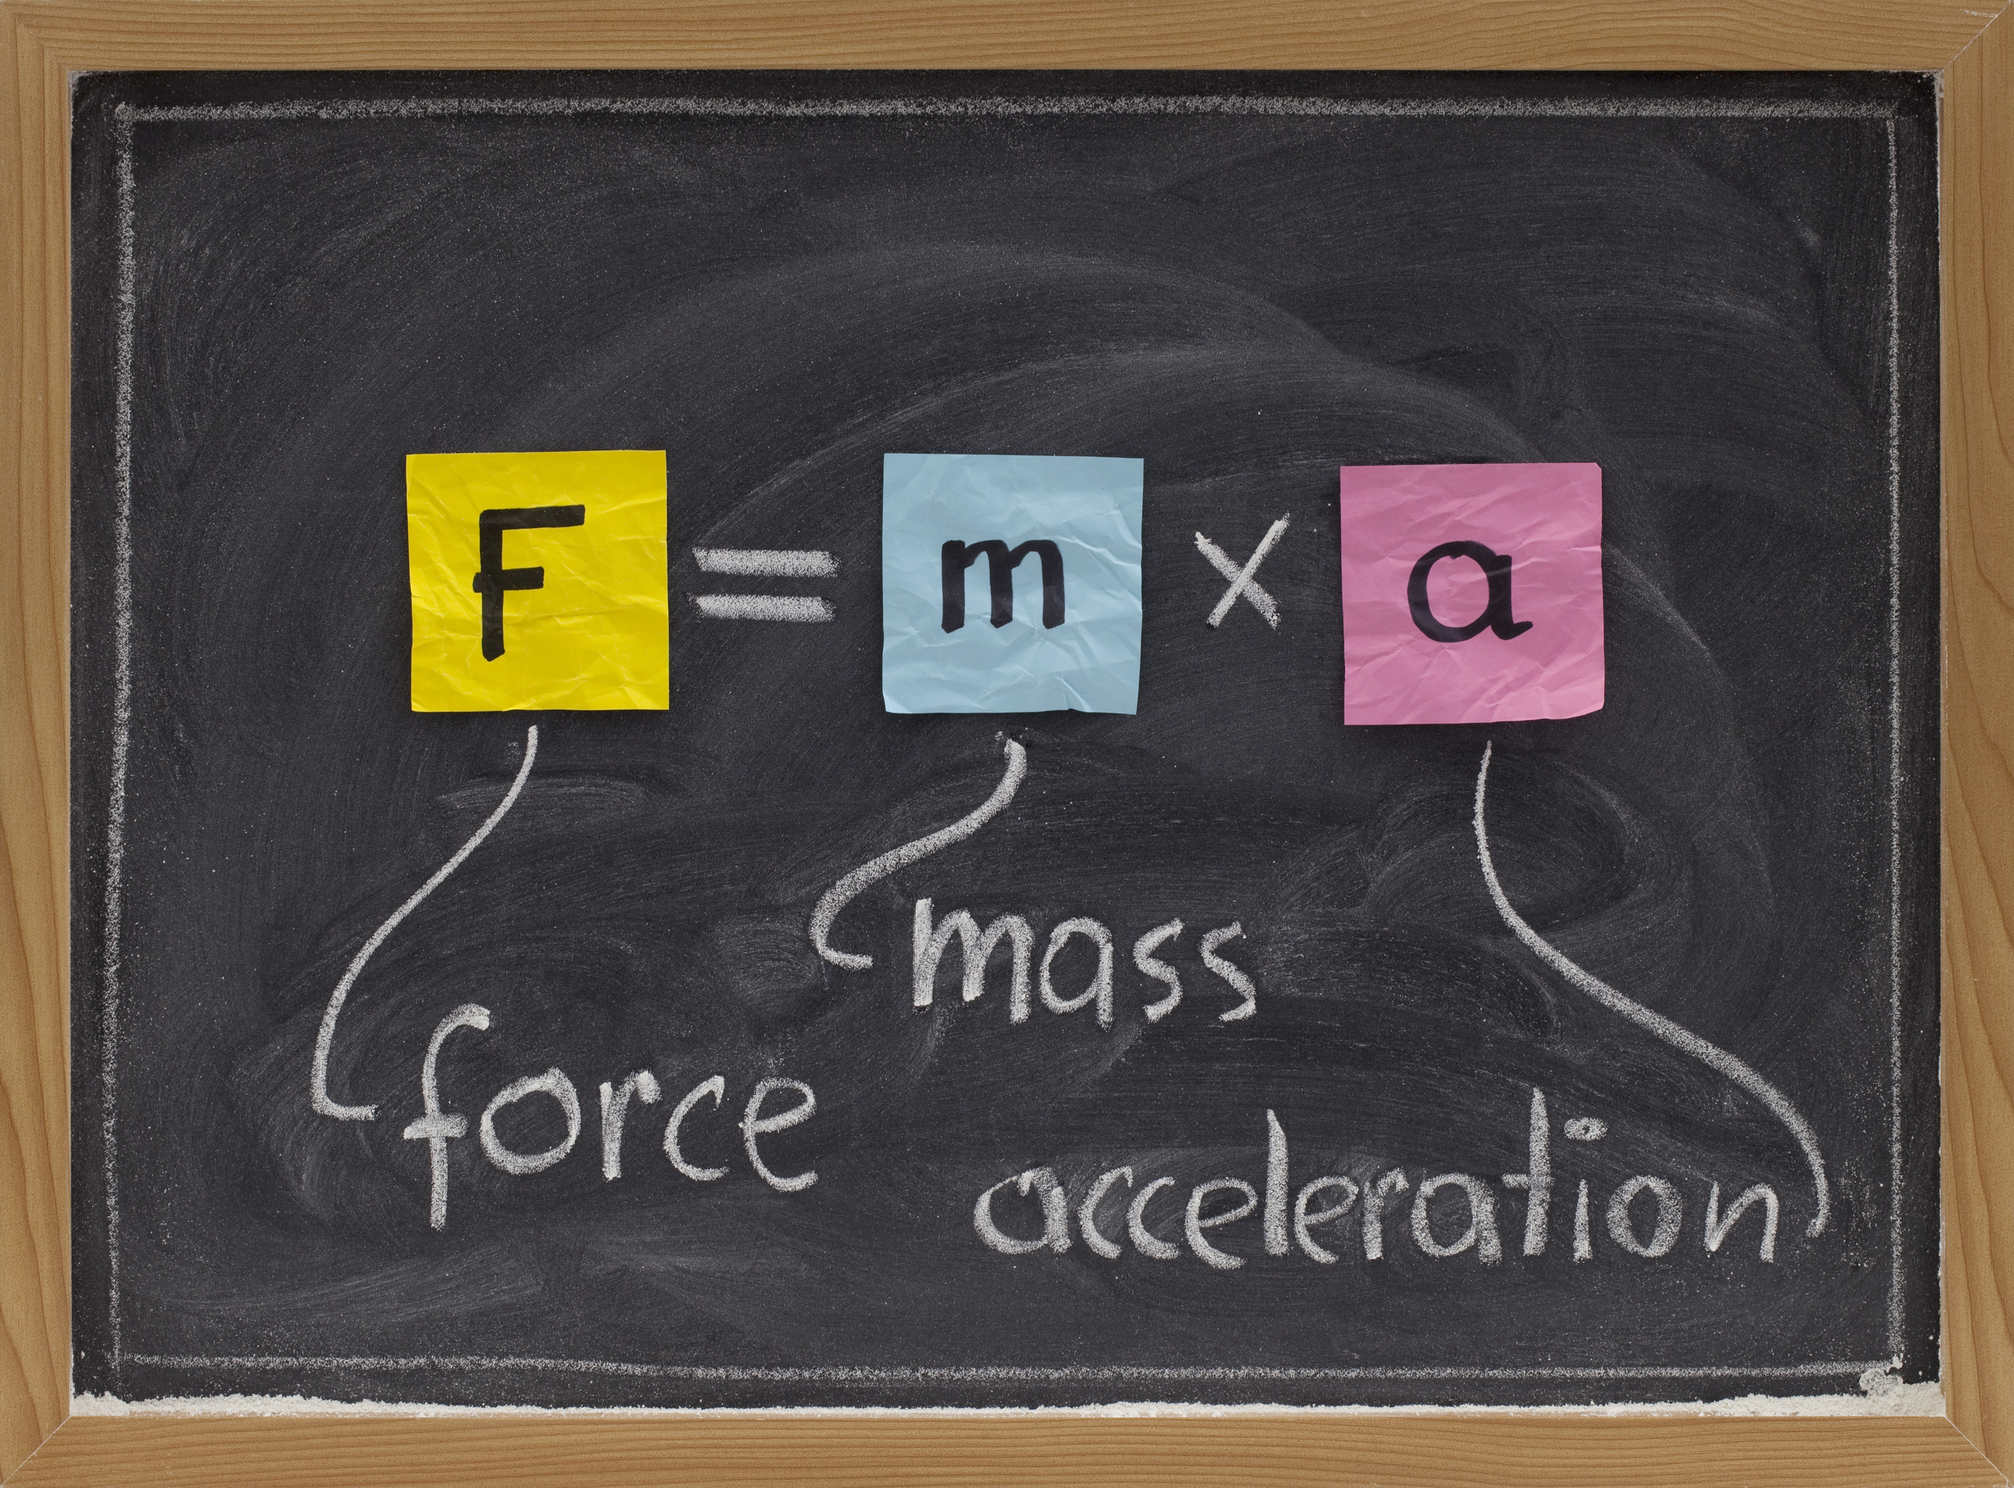 Force equals mass times acceleration.